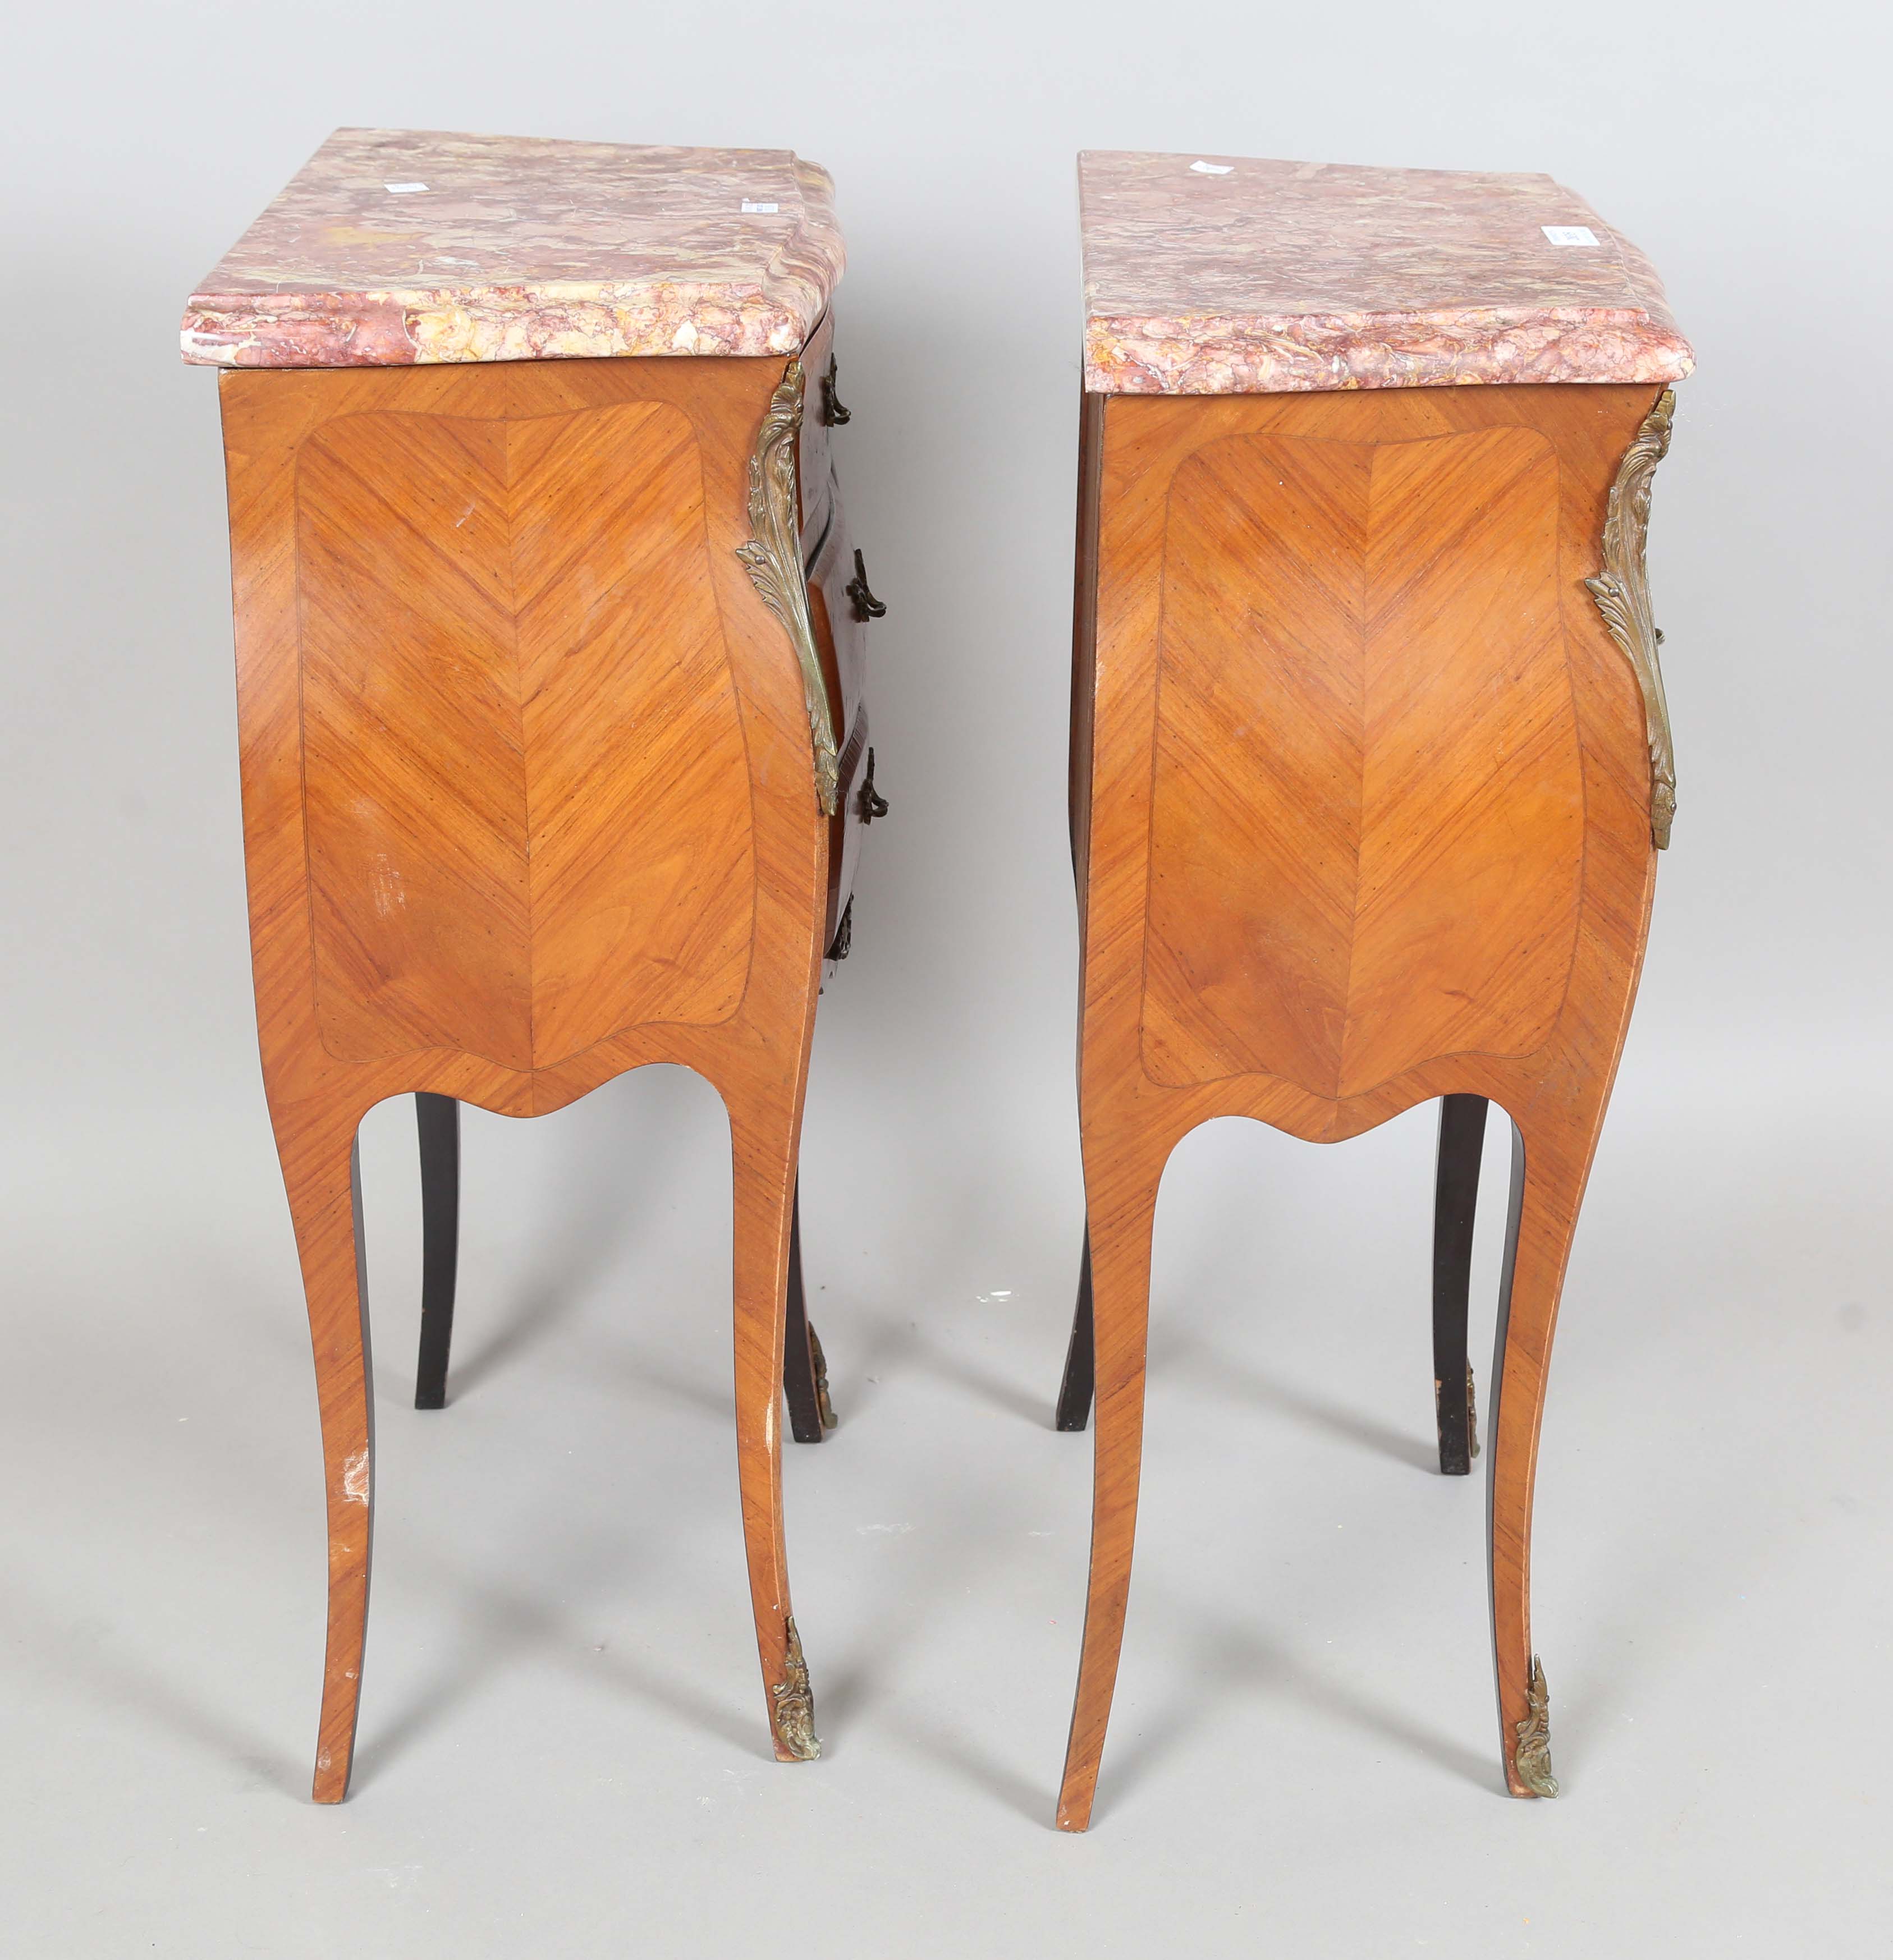 A pair of 20th century French kingwood marble-topped bedside chests with applied gilt metal - Image 4 of 7